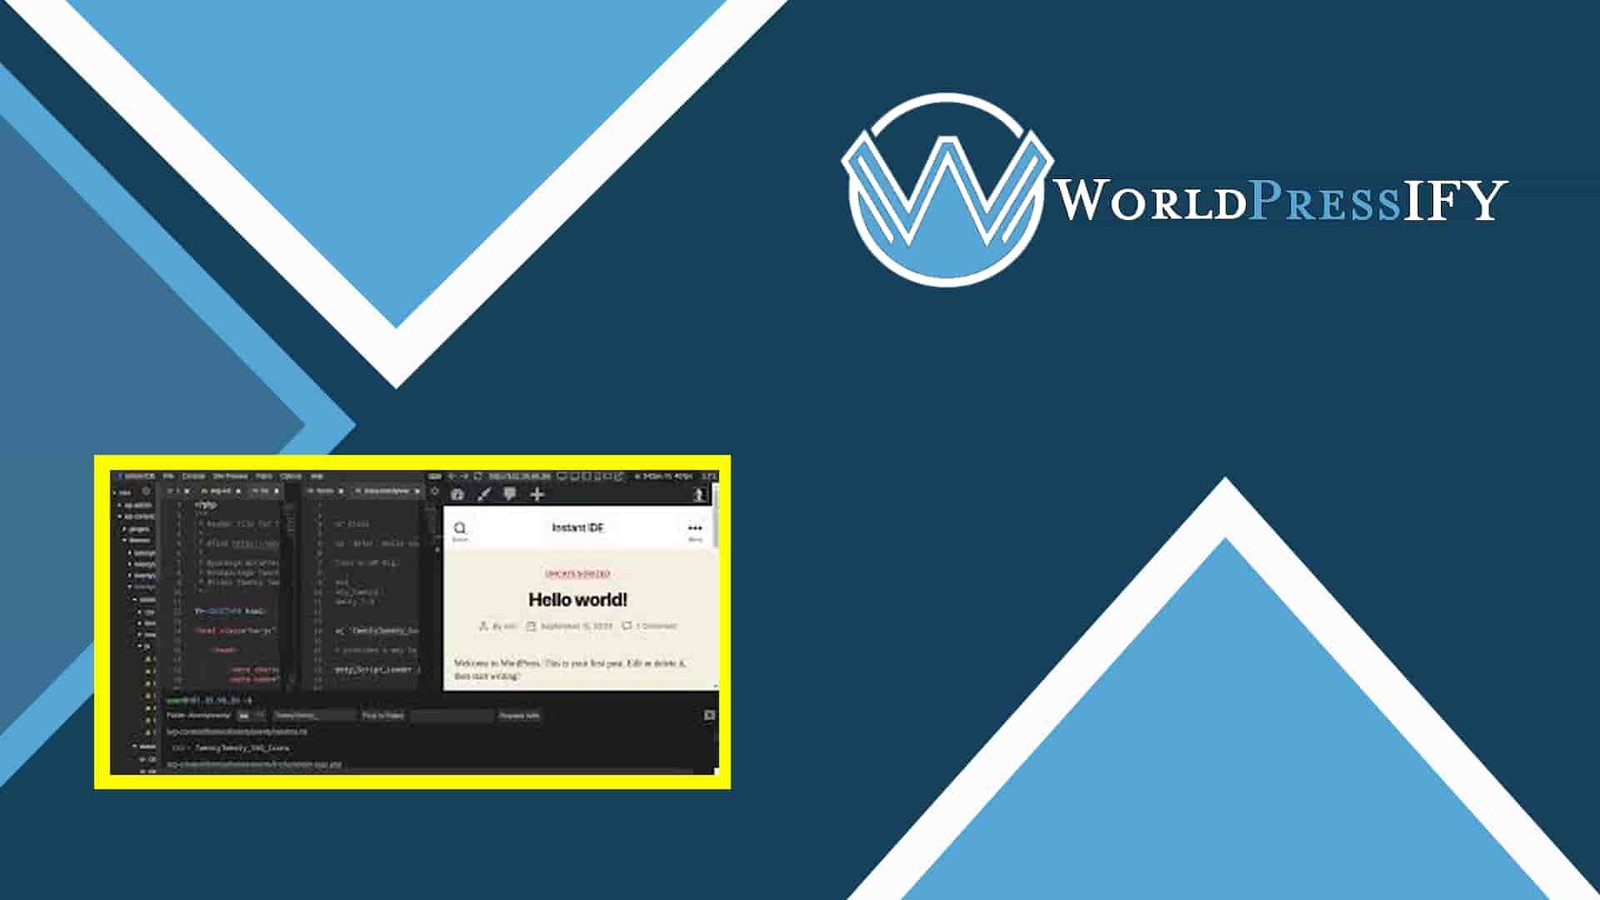 CobaltApps Instant IDE Manager - WorldPress IFY